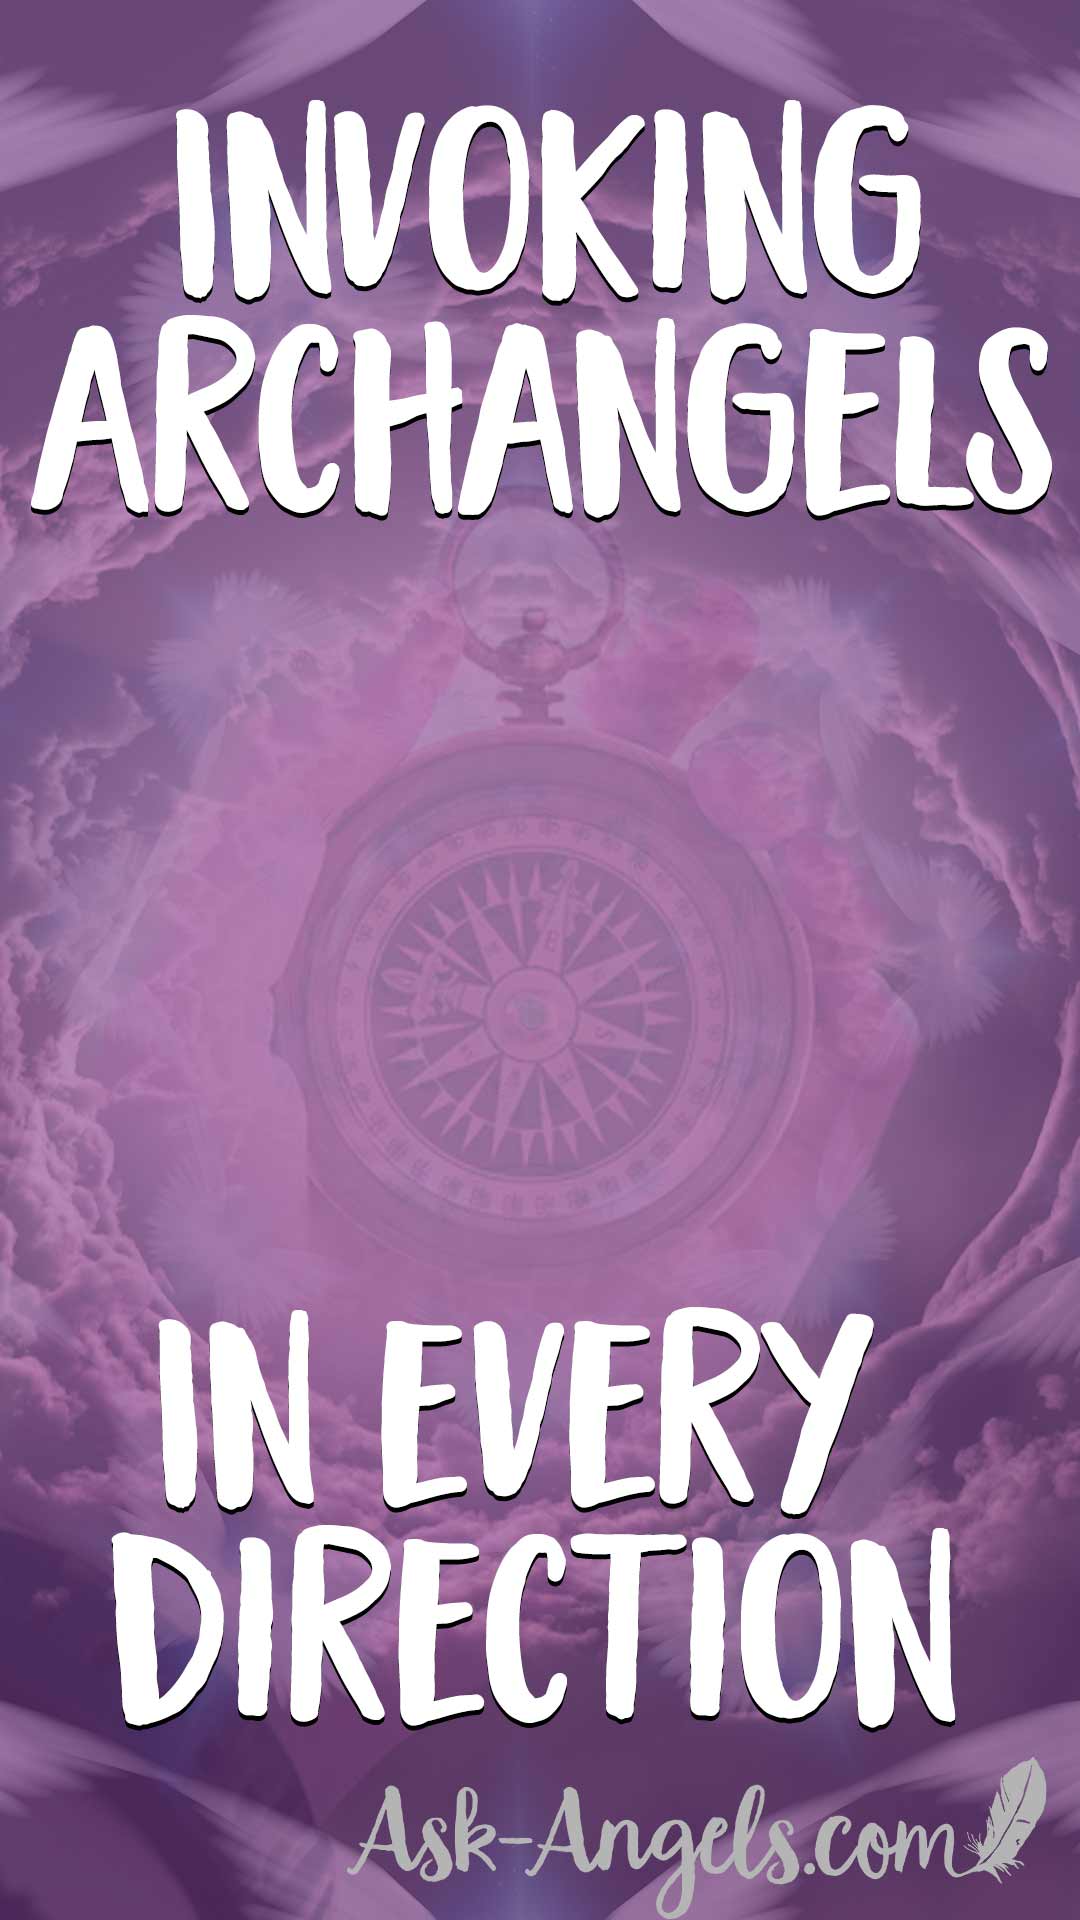 Archangel invocation - Invoking Archangels in Every Direction.